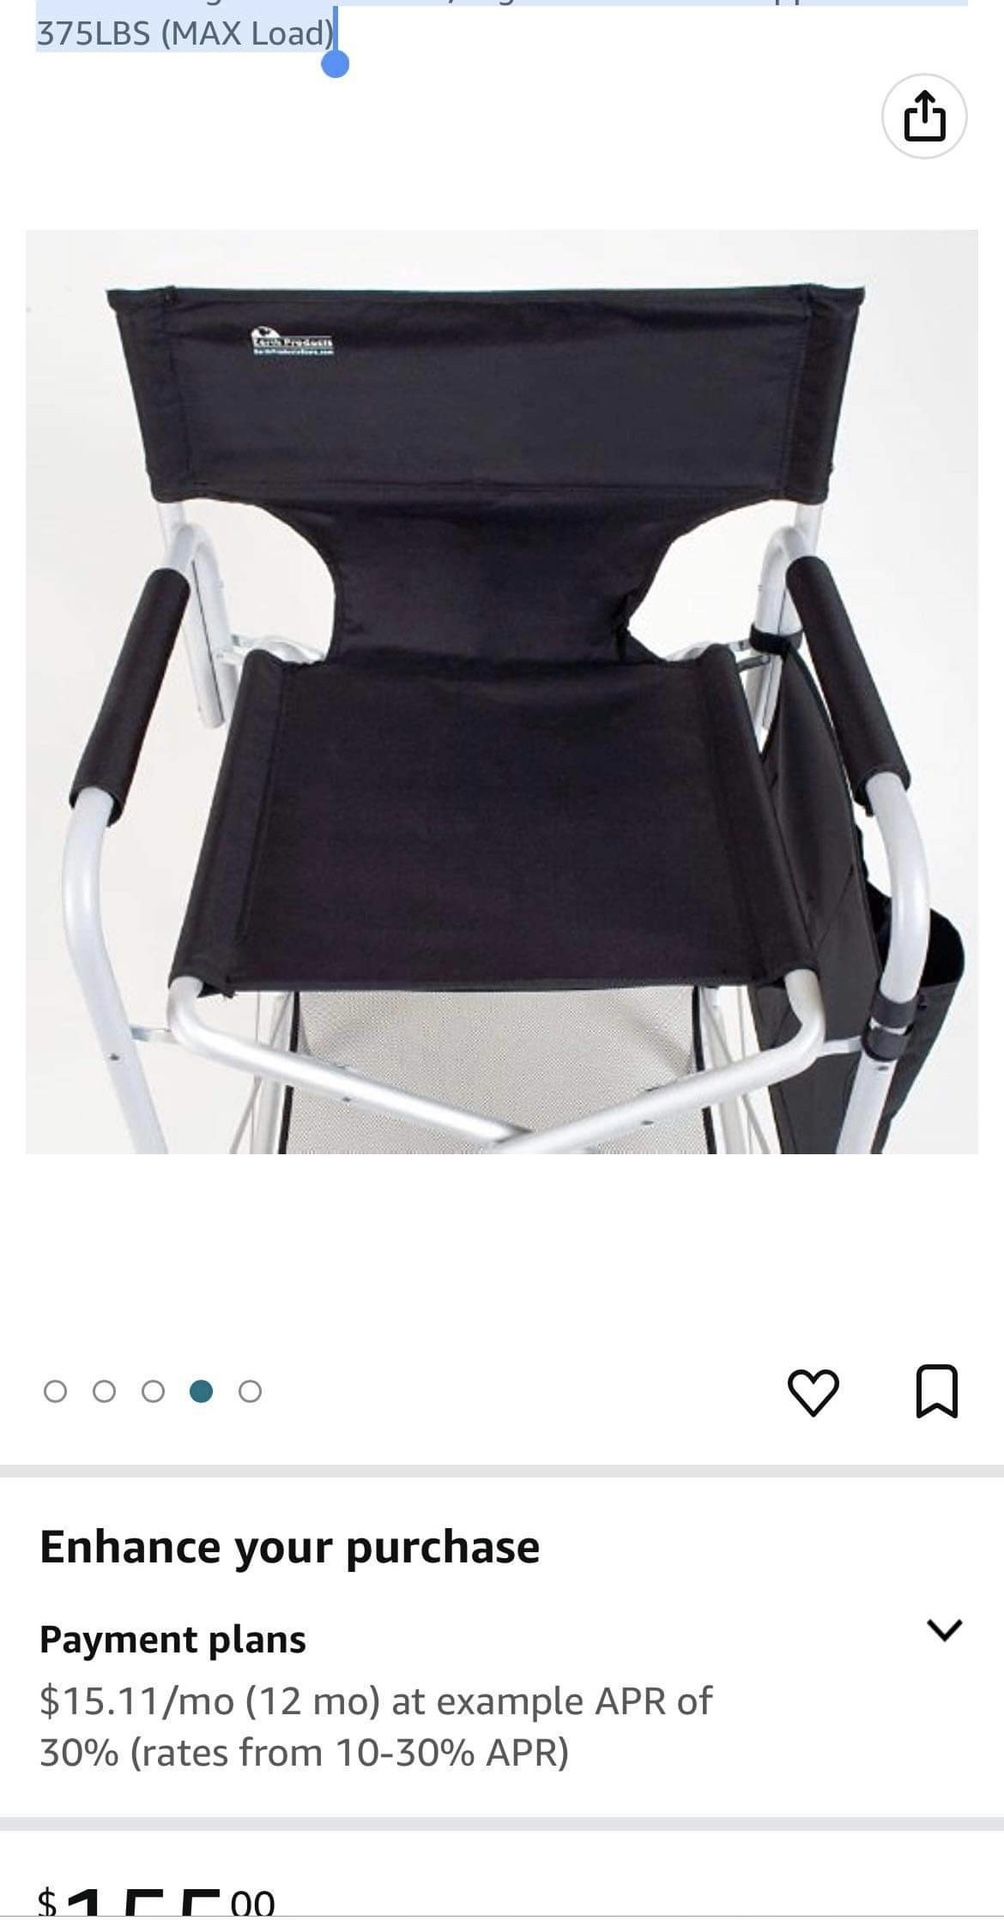 Tall Directors Chairs Foldable 26.4",Makeup Artist Chair for Clients with Side Table Cup Holder Storage Bag 400lbs Capacity 23.2" L x 19.7" W x 40.6" 